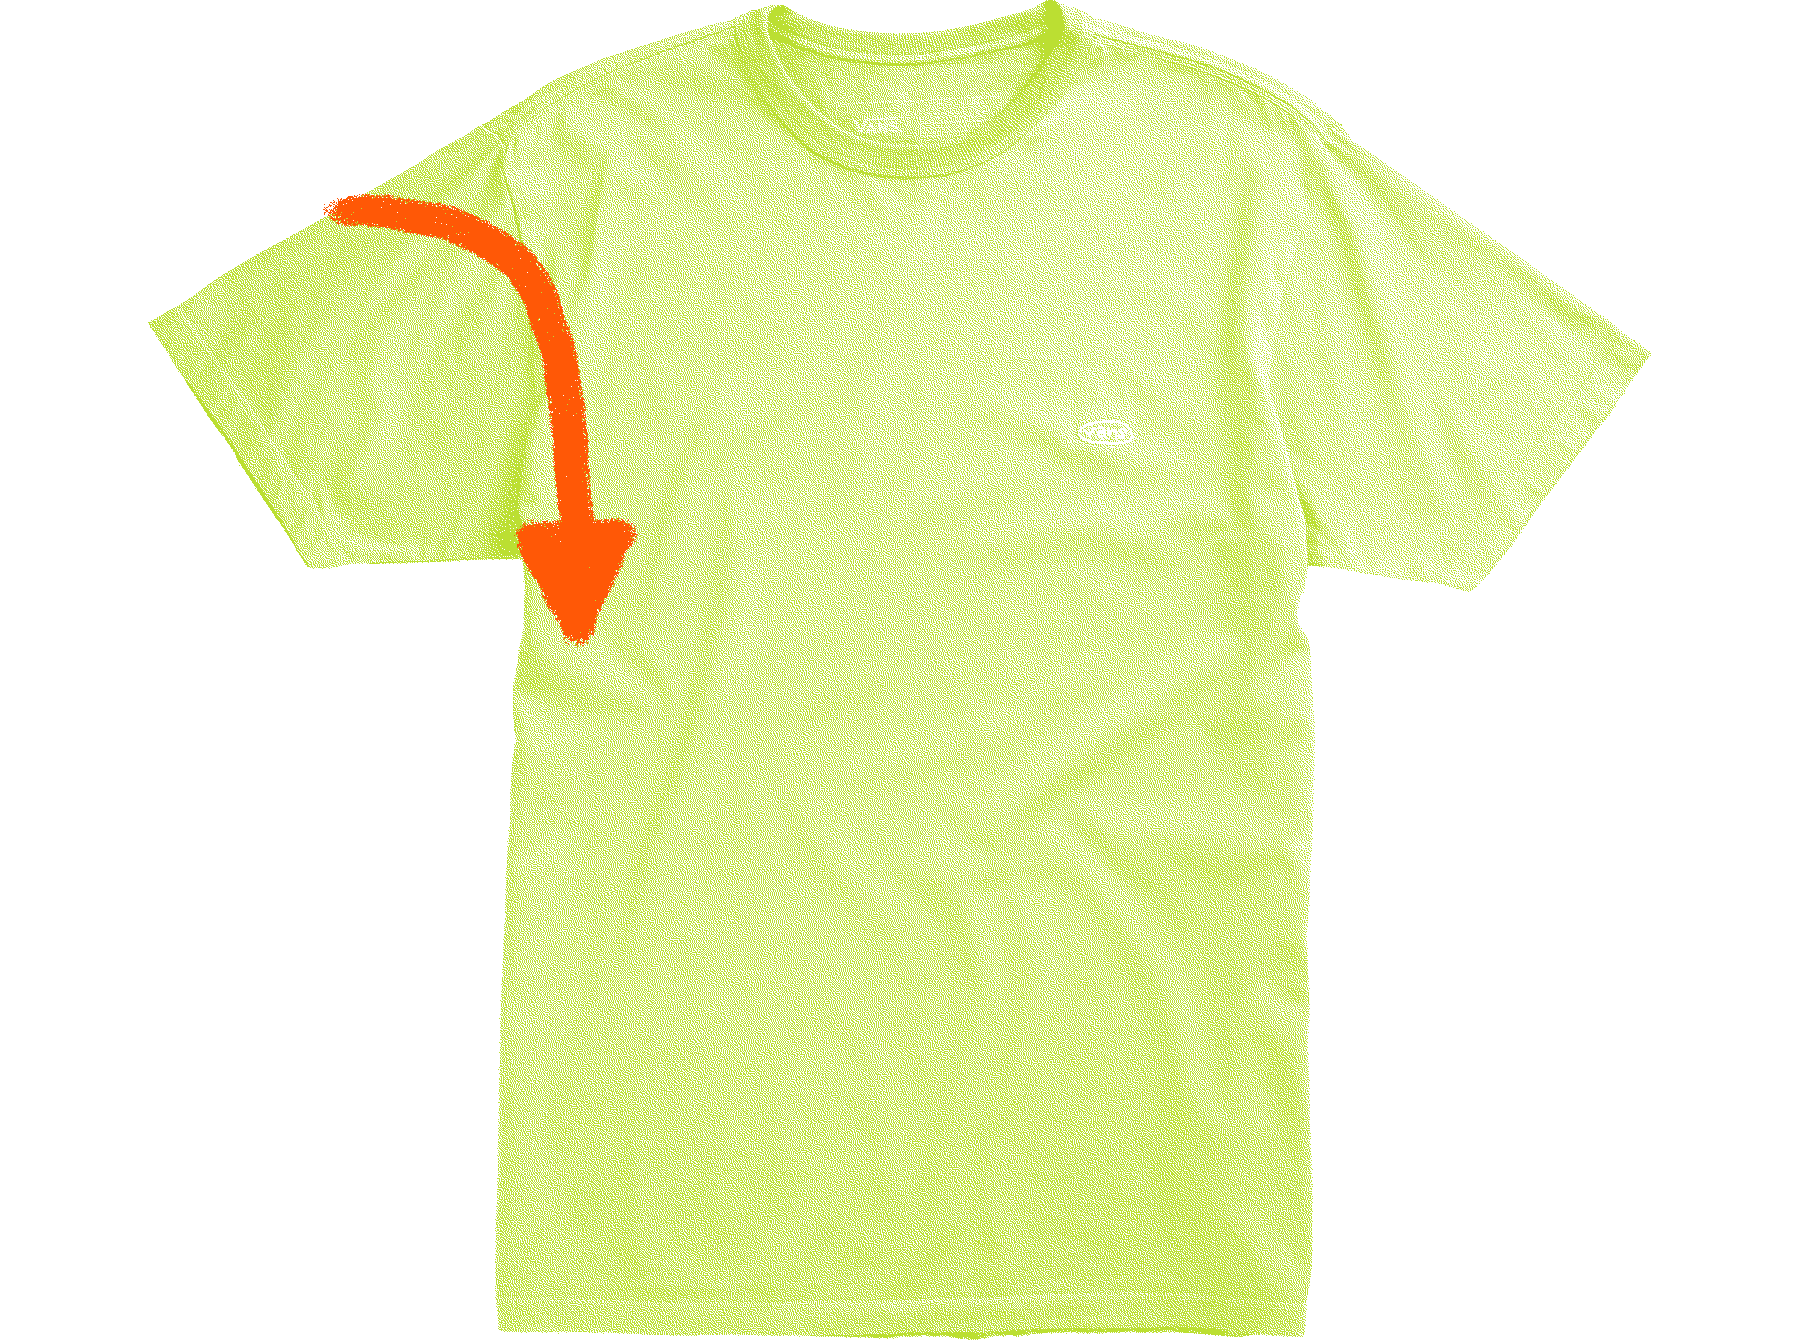 Animated graphic of a tshirt